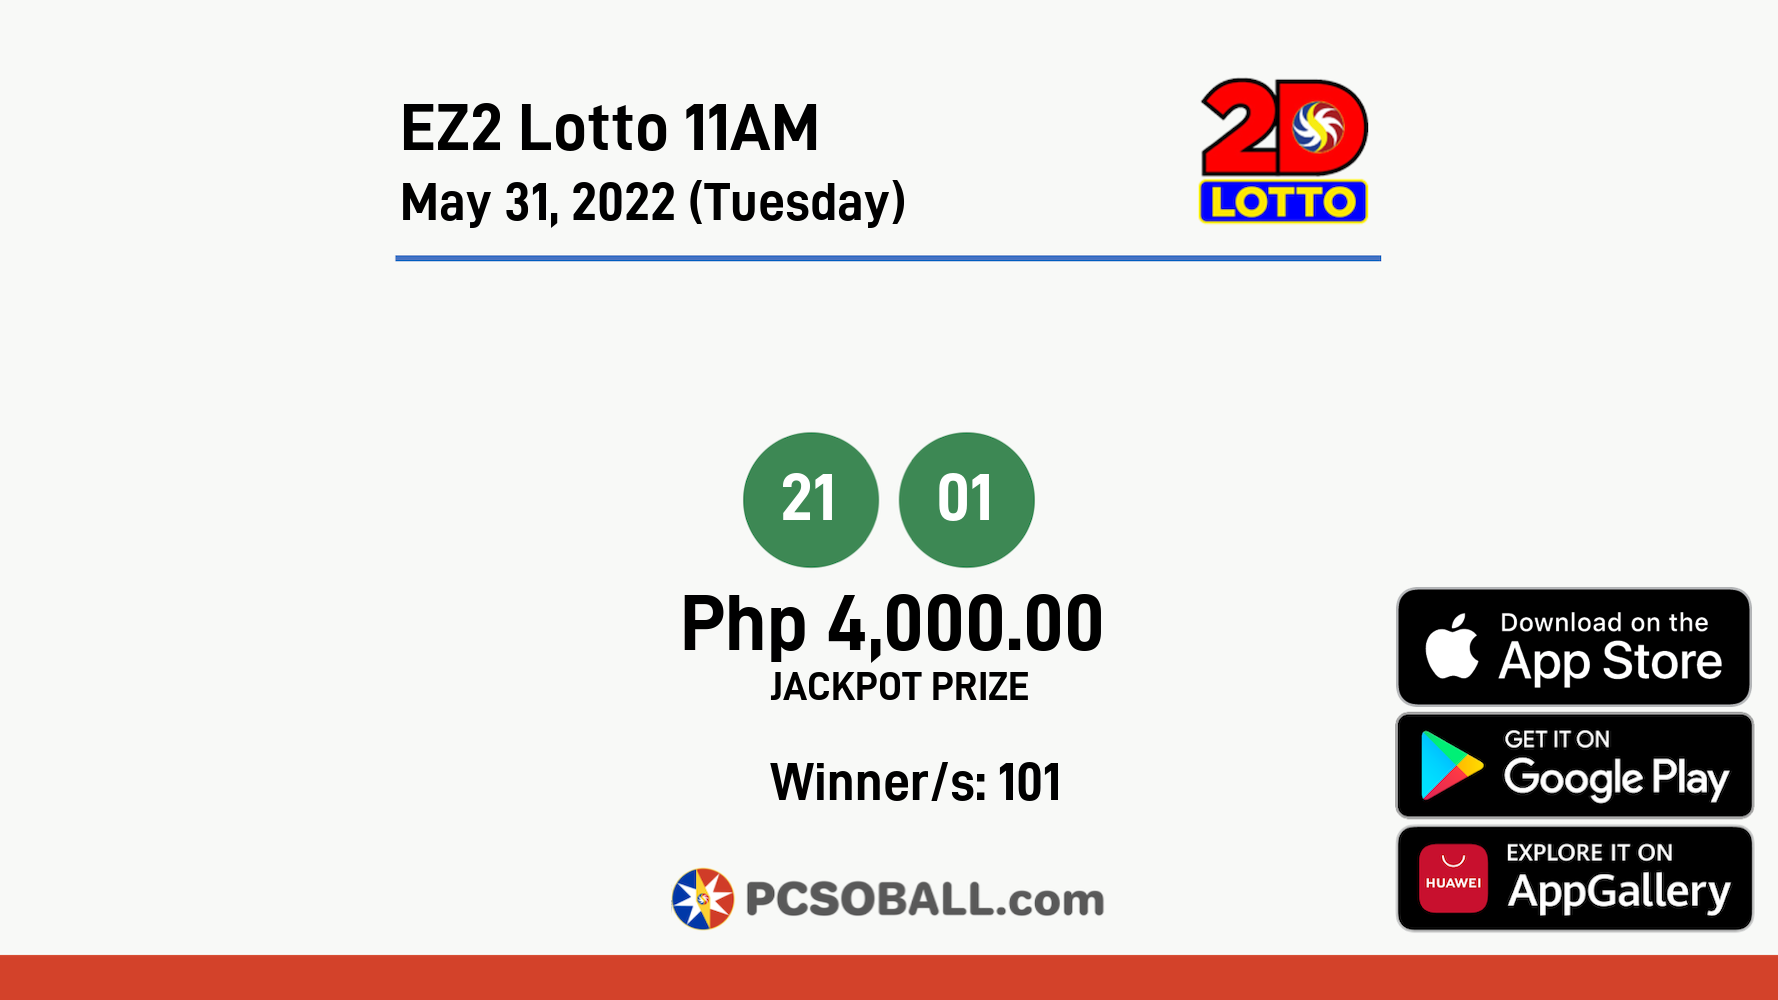 EZ2 Lotto 11AM May 31, 2022 (Tuesday) Result